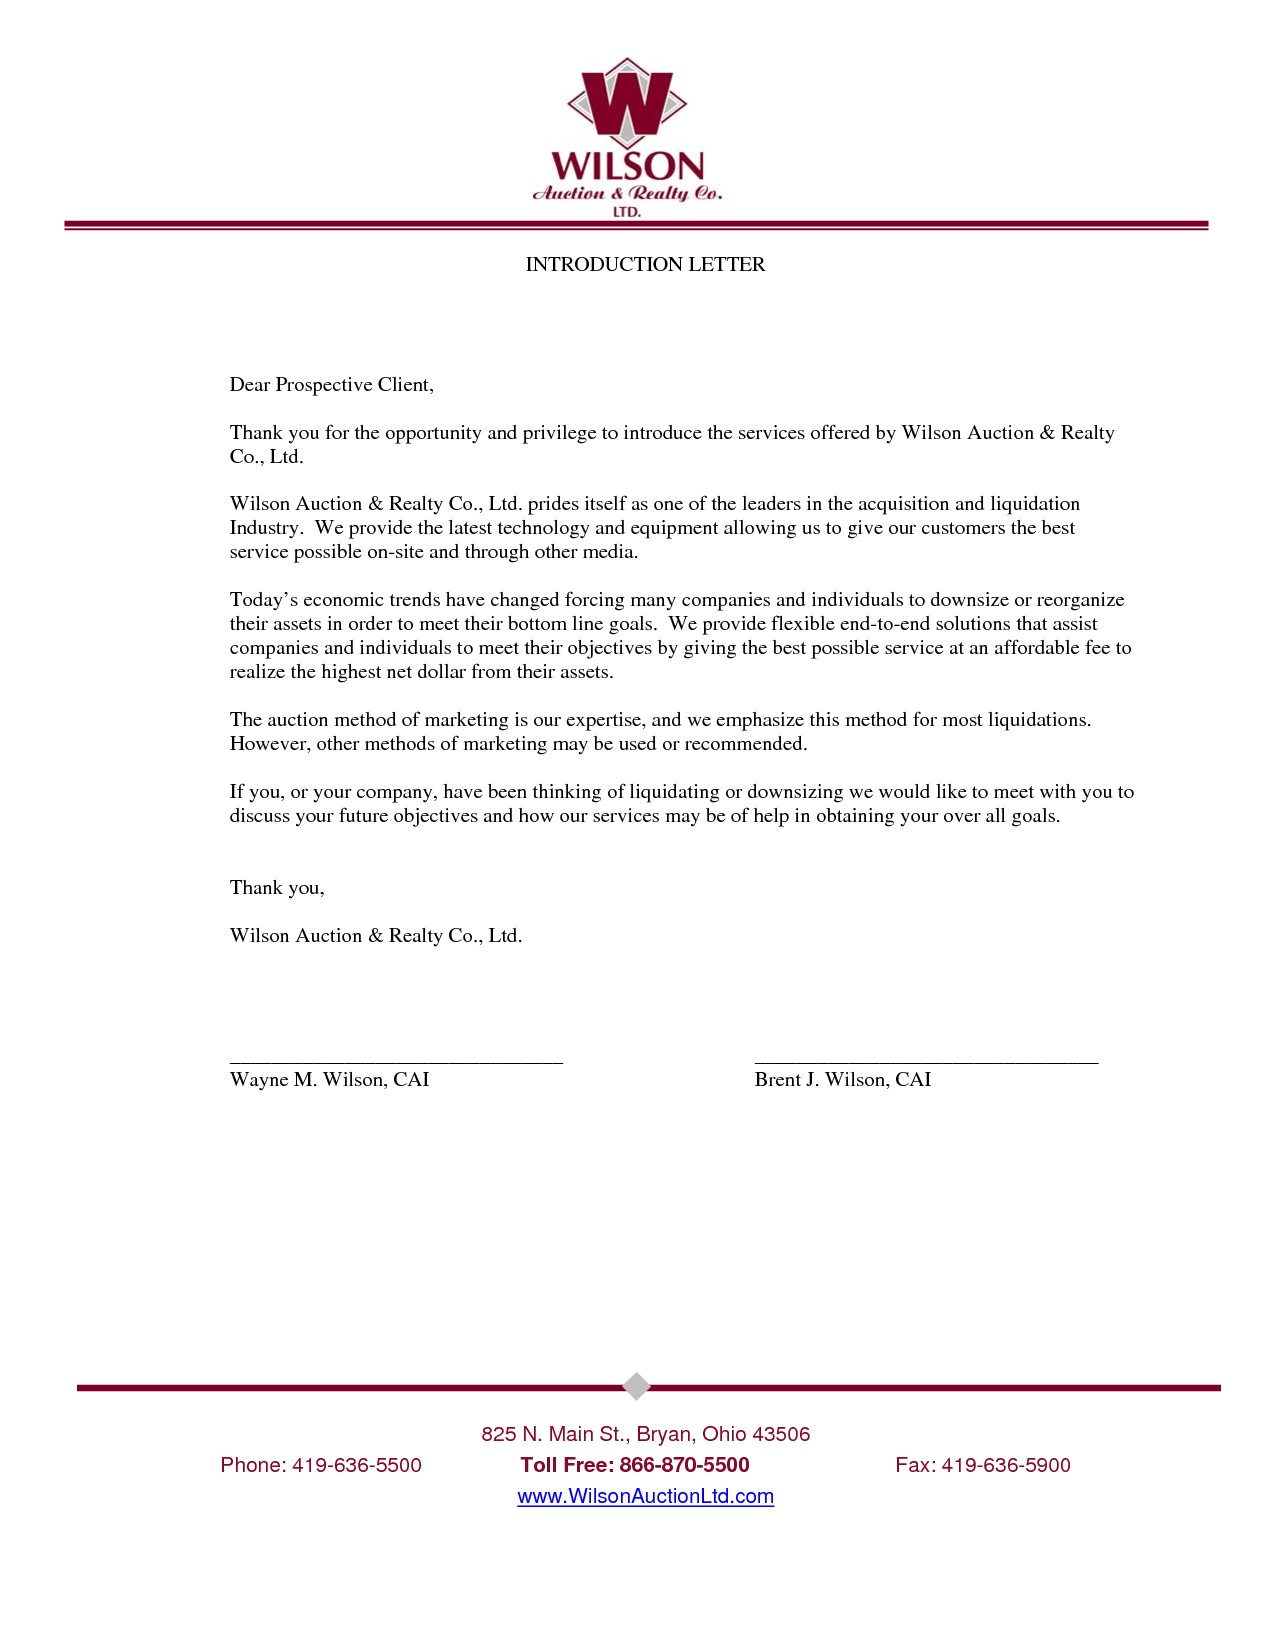 new business introduction letter sample Boat.jeremyeaton.co